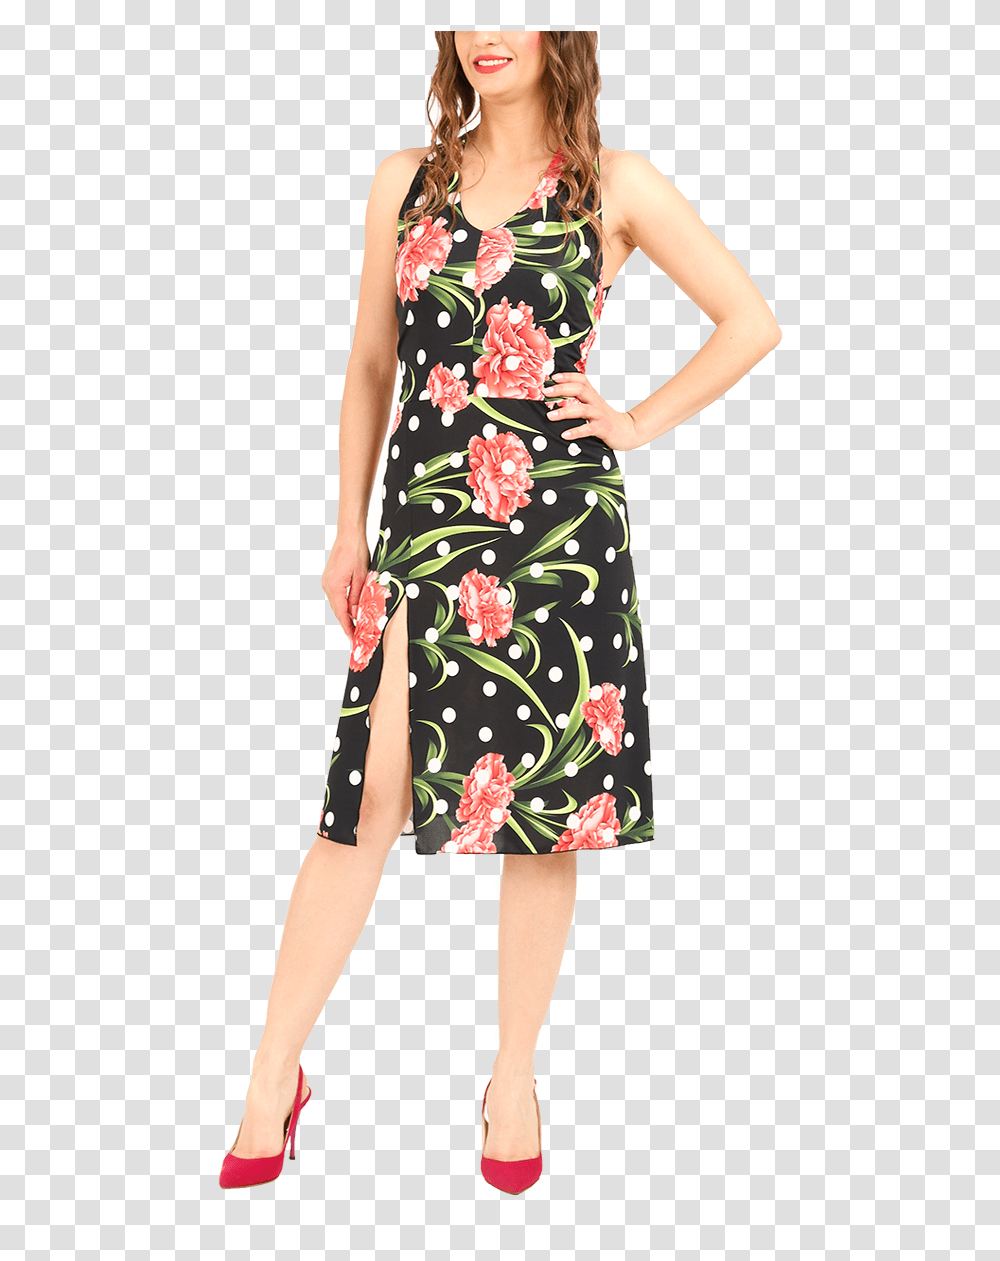 Tango Dress With Carnation Flowers Amp Polka Dot Print Day Dress, Apparel, Female, Person Transparent Png